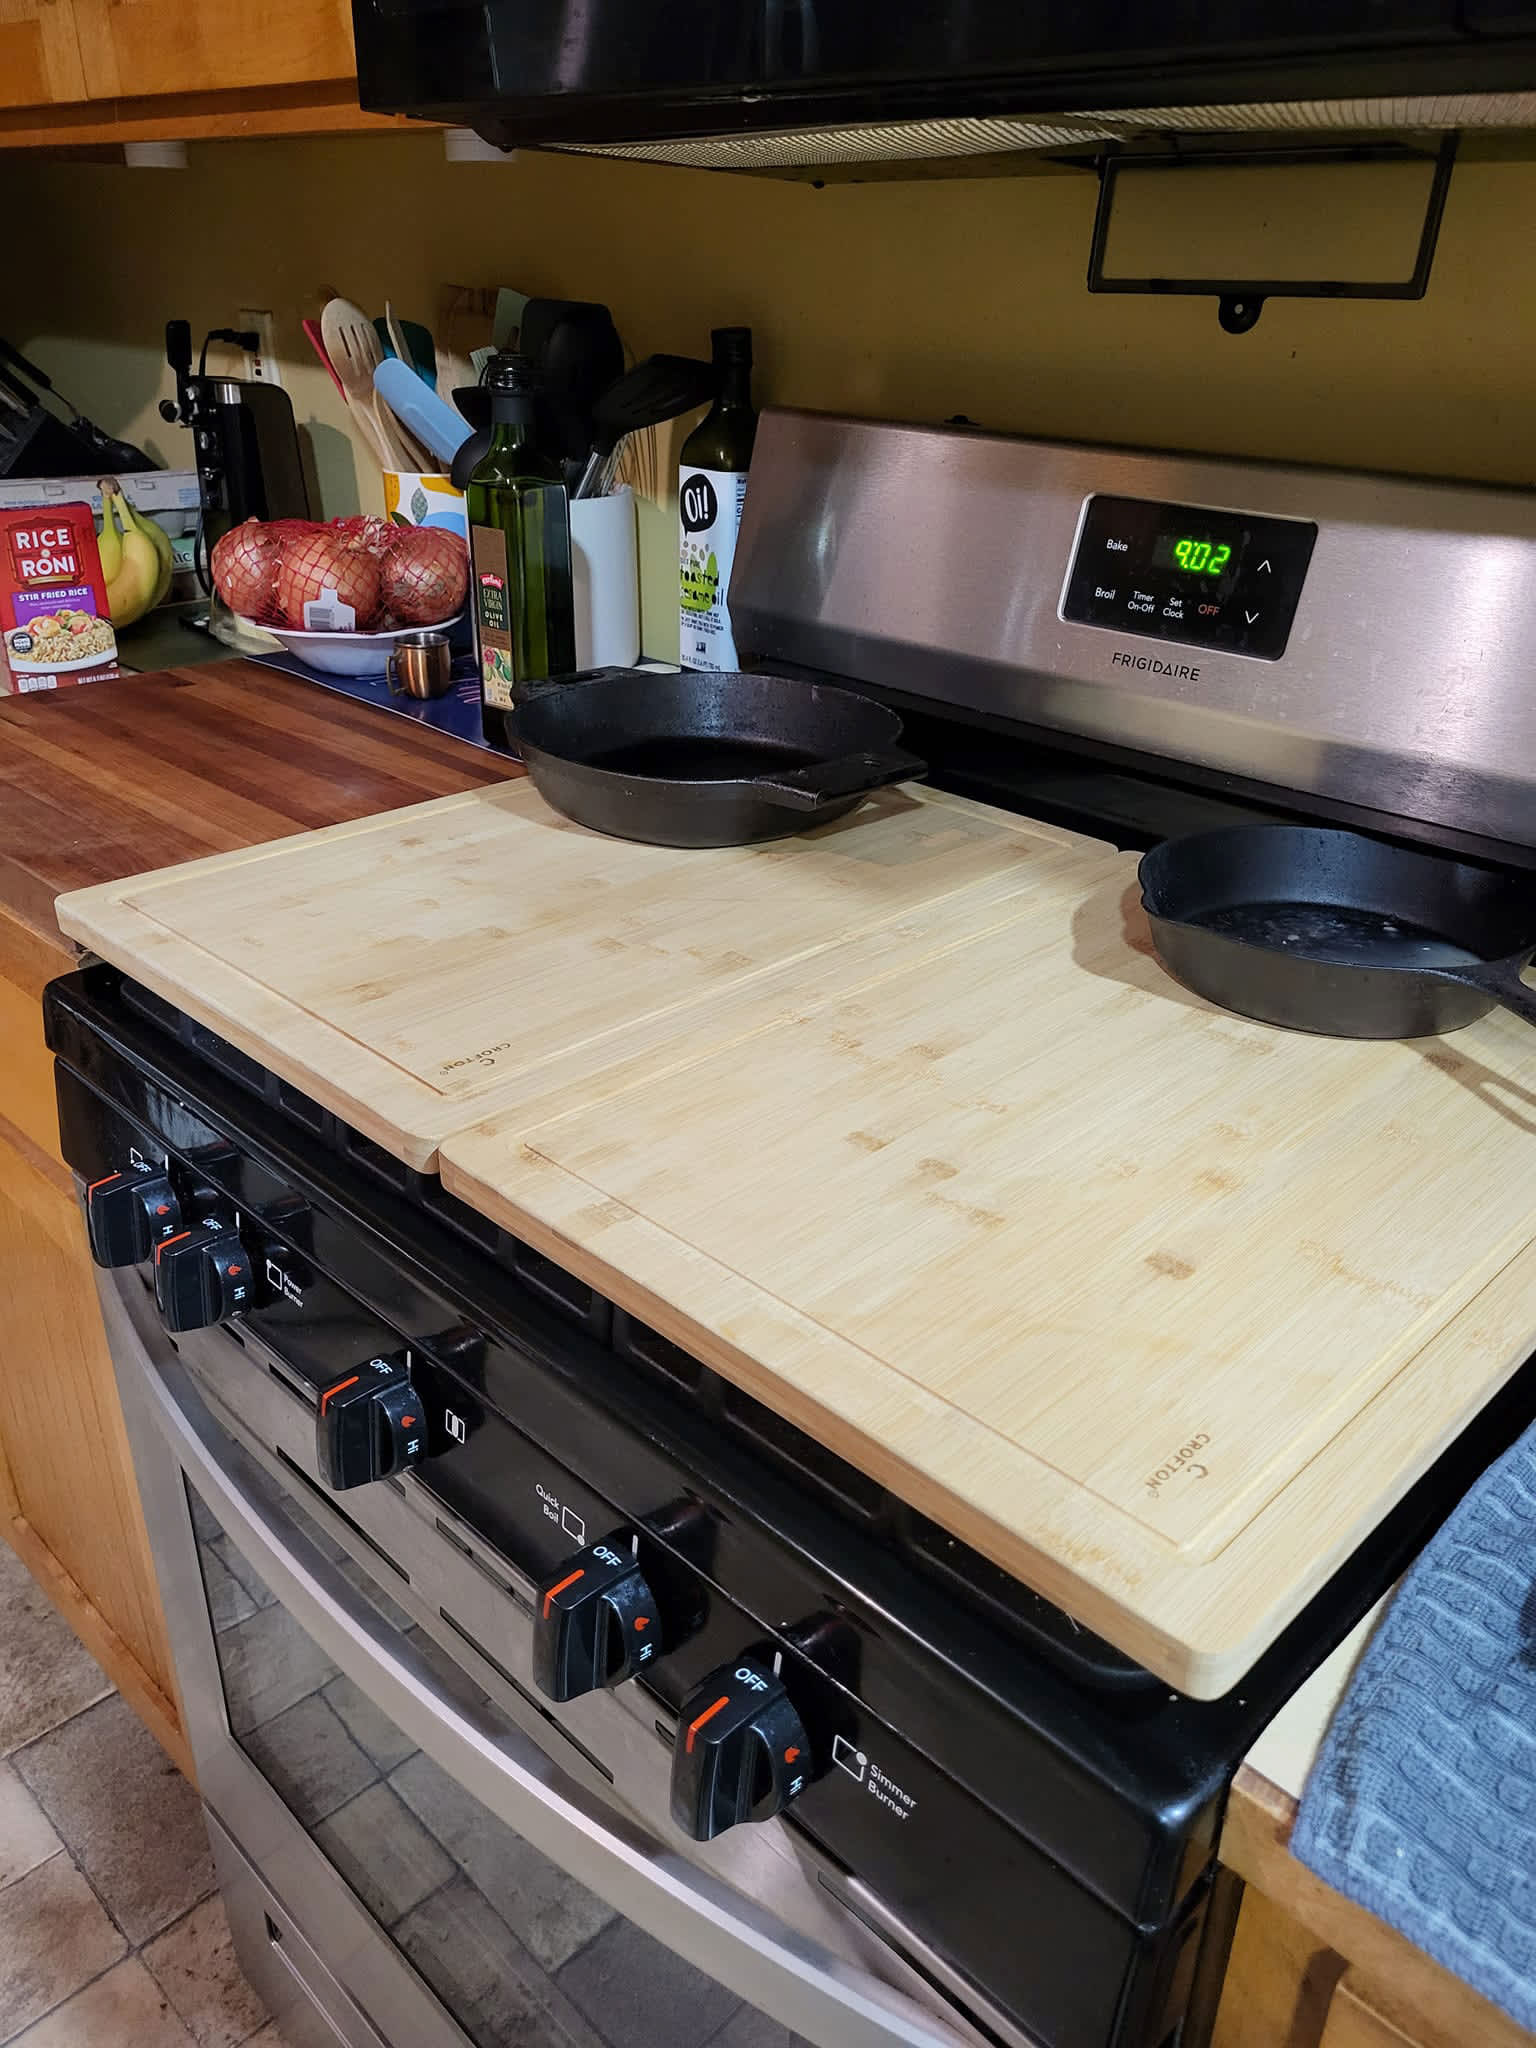 This Smart $20 Aldi Hack Doubles Your Kitchen's Counter Space